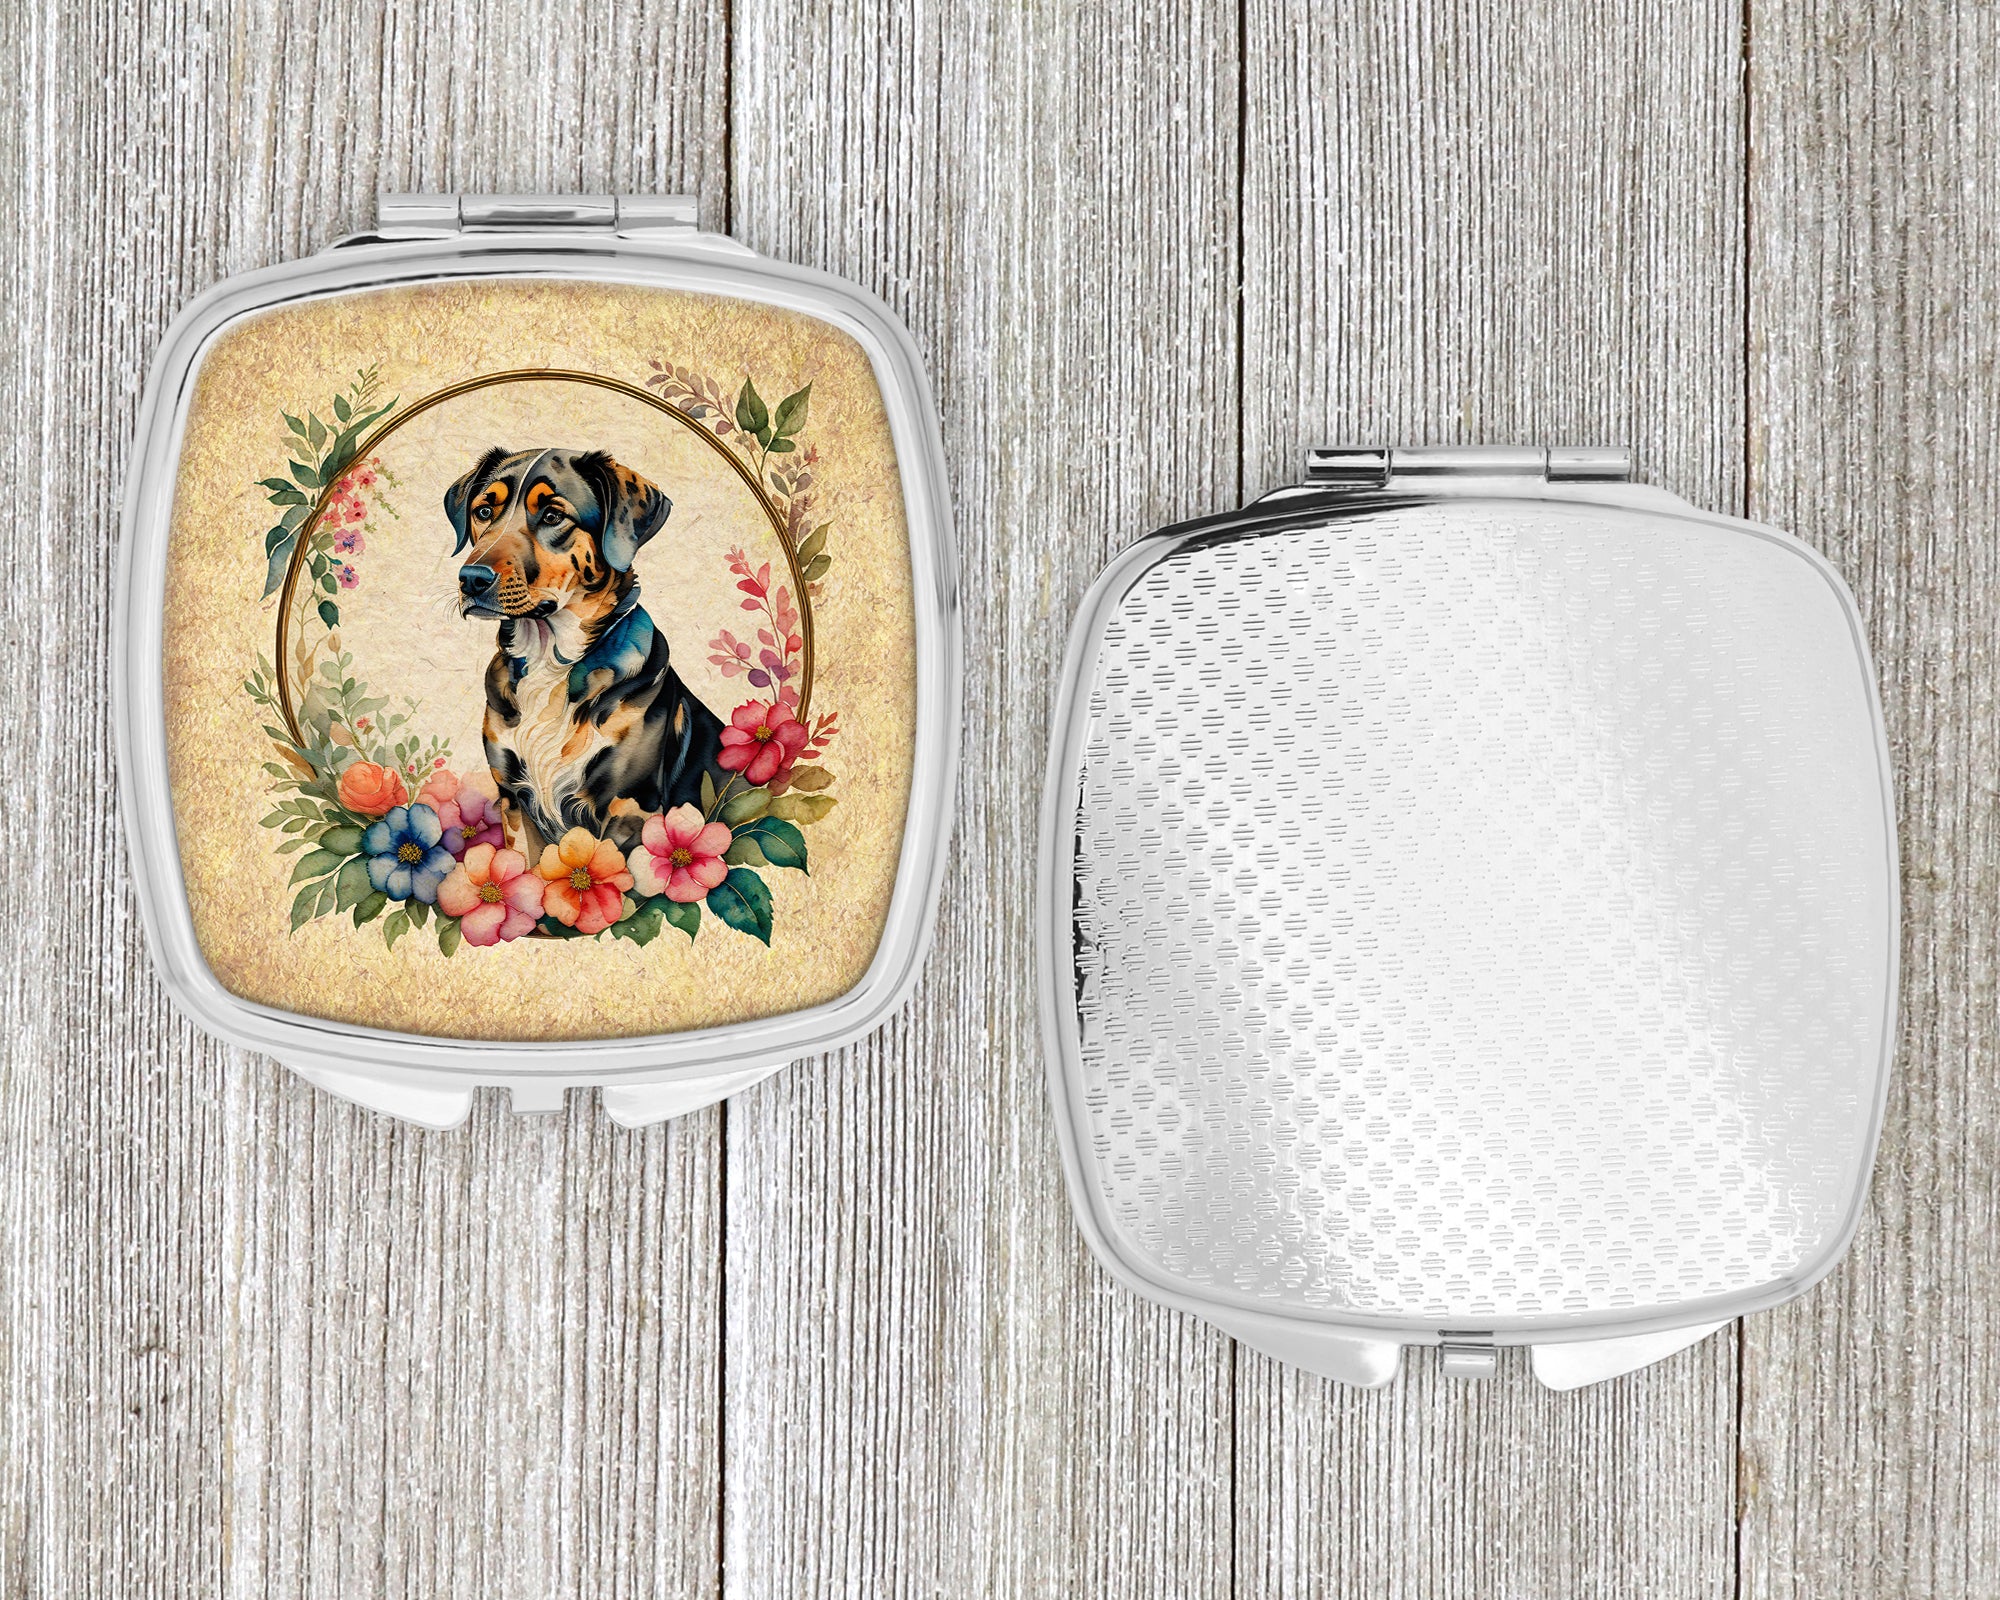 Catahoula Leopard Dog and Flowers Compact Mirror